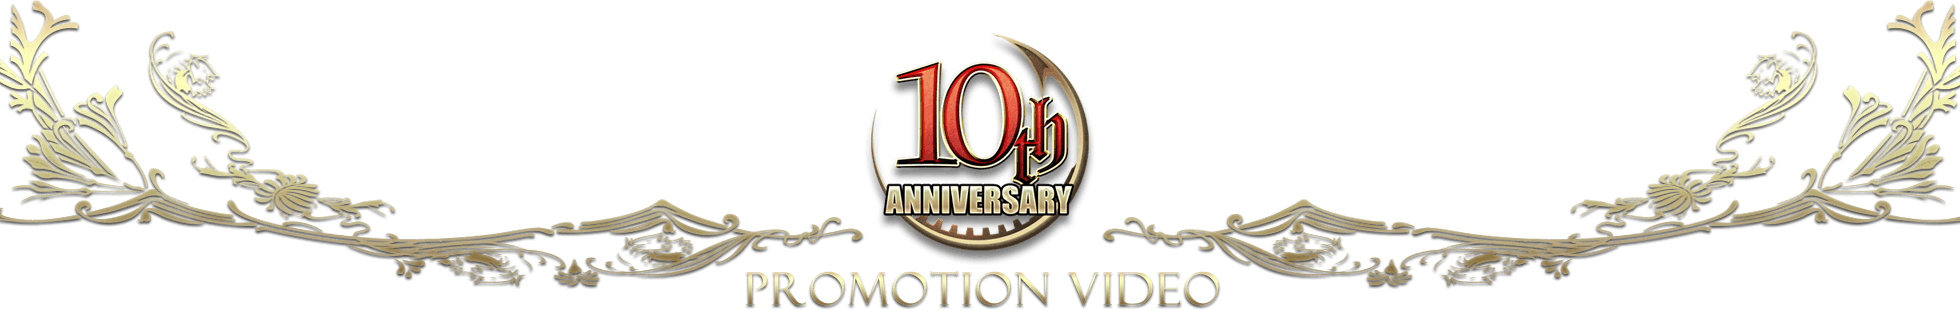 10th Anniversary Promotion Video